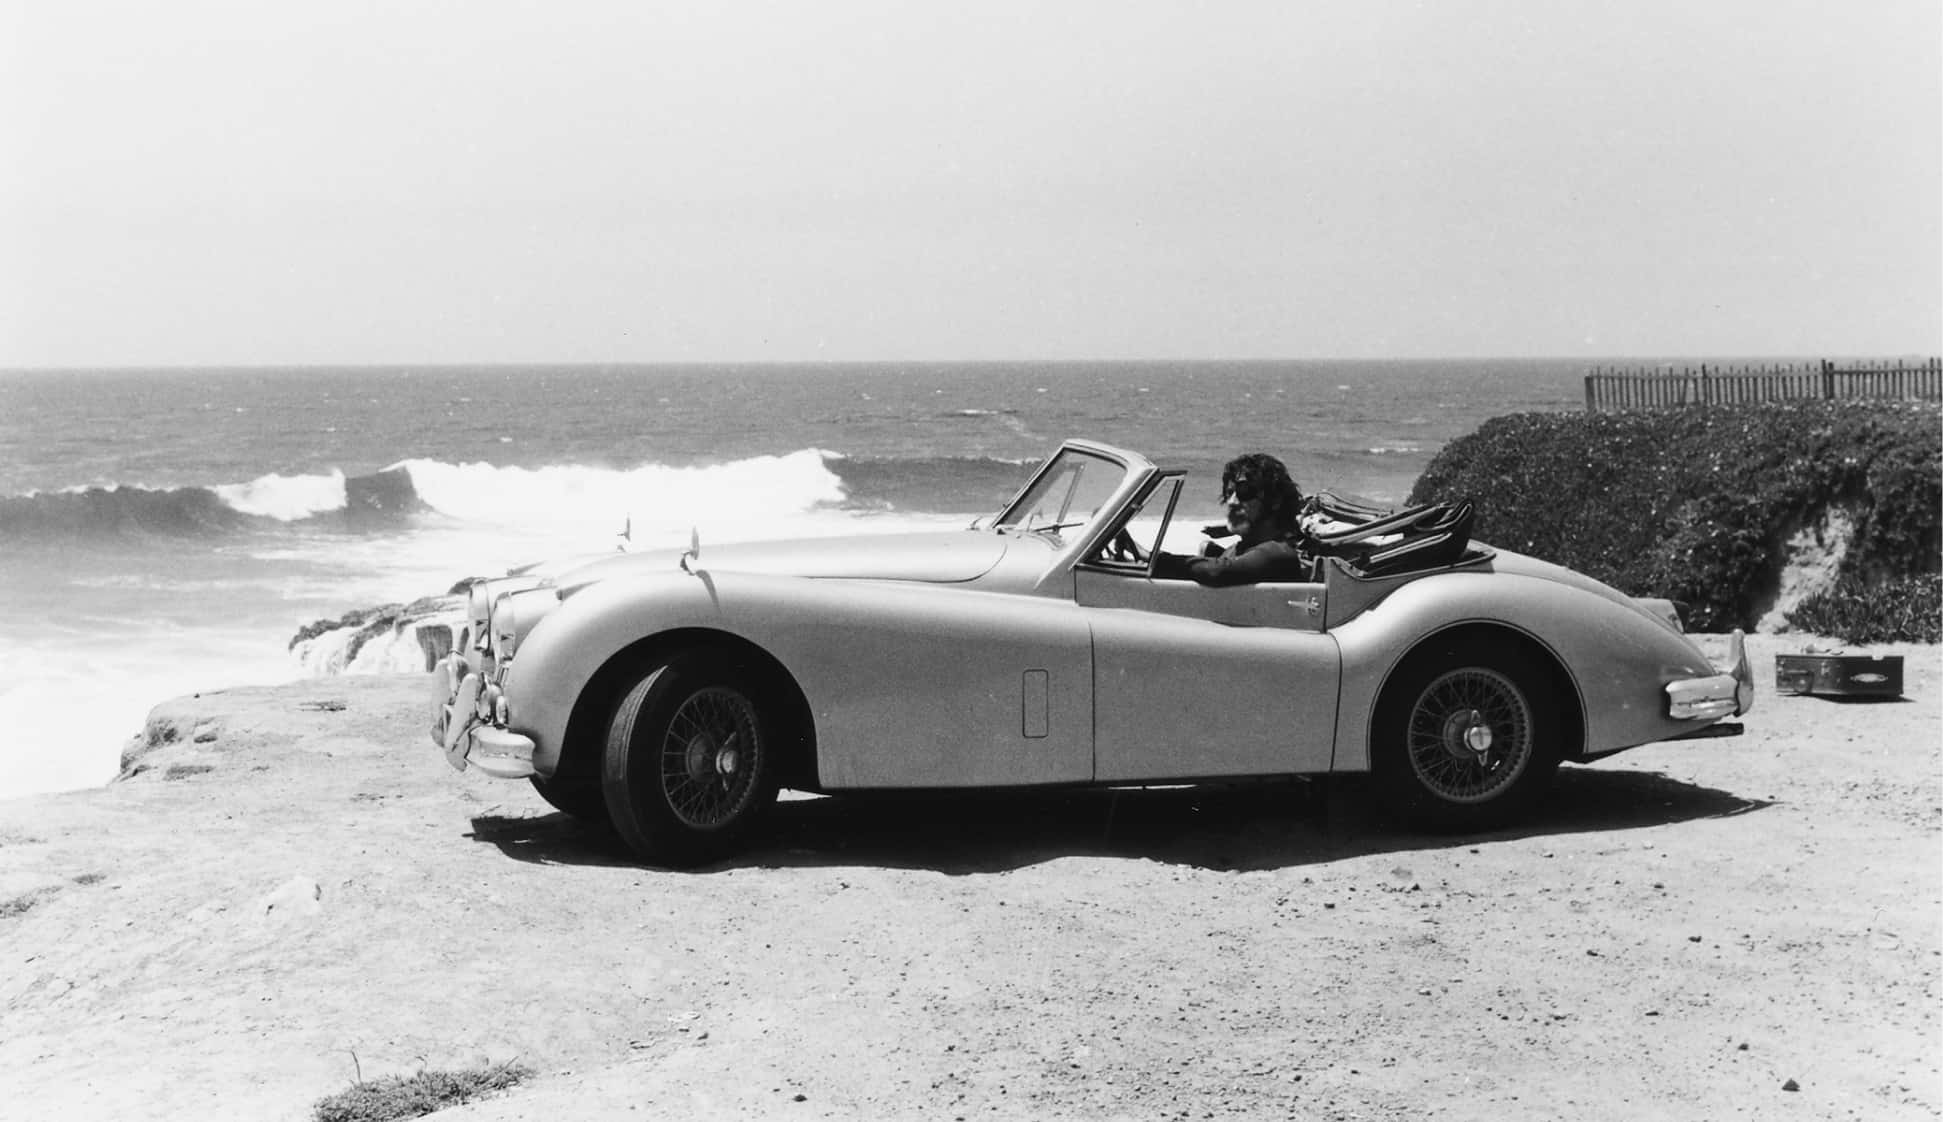 A black and white photo of a classic convertible car parked by the seaside, with a person in the driver's seat enjoying the ocean view, conveying a sense of vintage leisure.